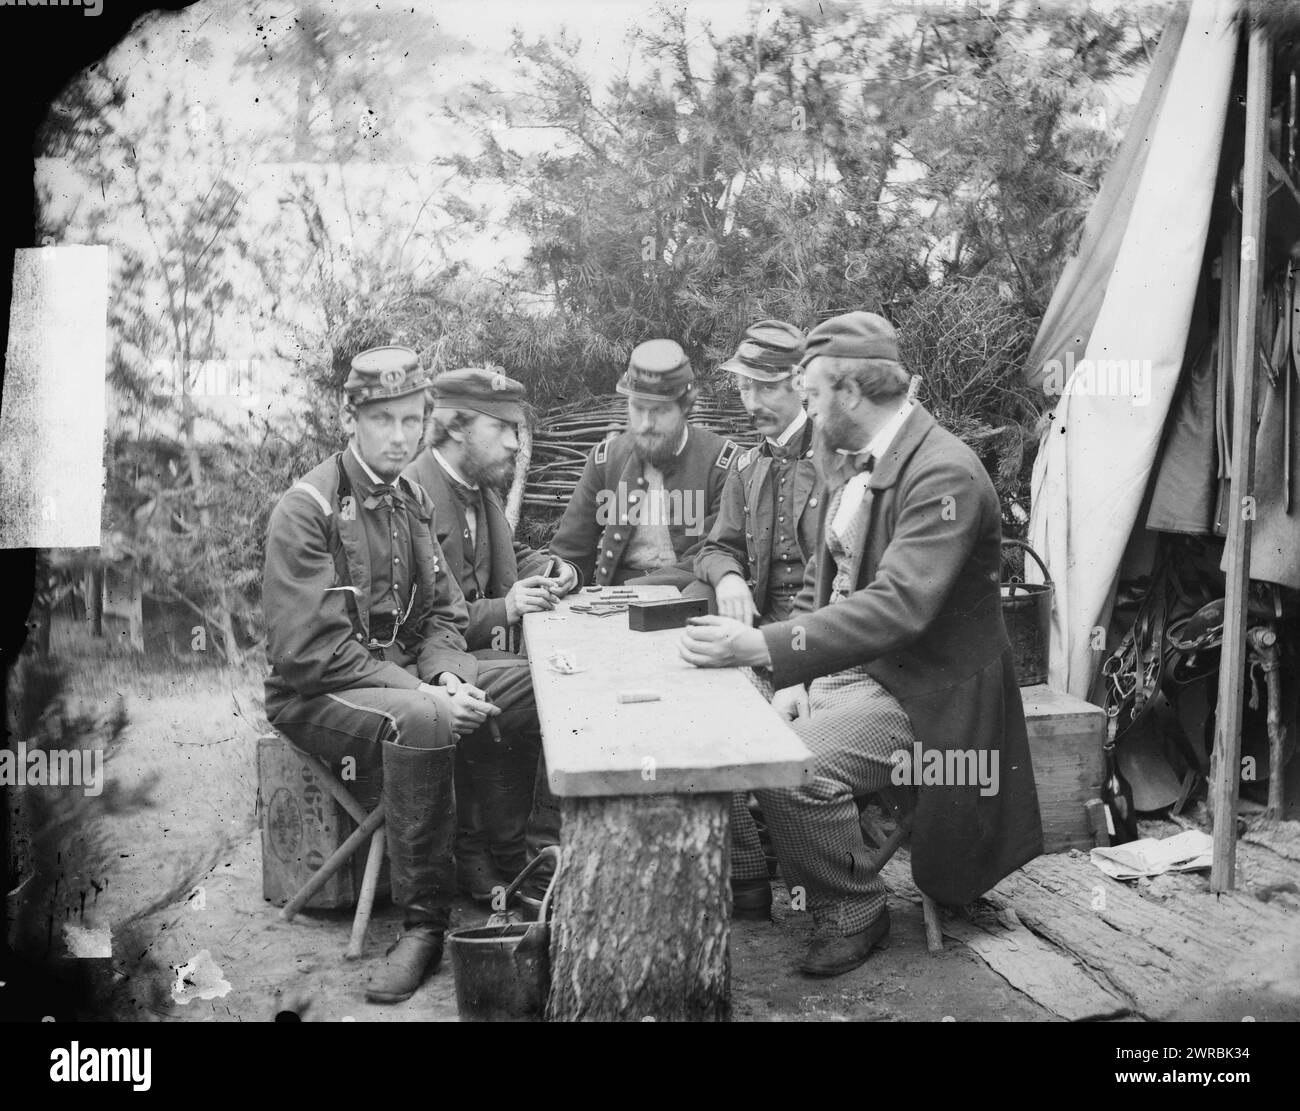 Yorktown, Va., vicinity. Duc de Chartres, Comte de Paris, Prince de Joinville, and friends playing dominoes at a mess table, Camp Winfield Scott, Photograph from the main eastern theater of war, the Peninsular Campaign, May-August 1862., Gibson, James F., 1828-, photographer, 1862 May., United States, History, Civil War, 1861-1865, Military life, Stereographs, 1860-1870., Stereographs, 1860-1870, Wet collodion negatives, 1 negative (2 plates): glass, stereograph, wet collodion Stock Photo